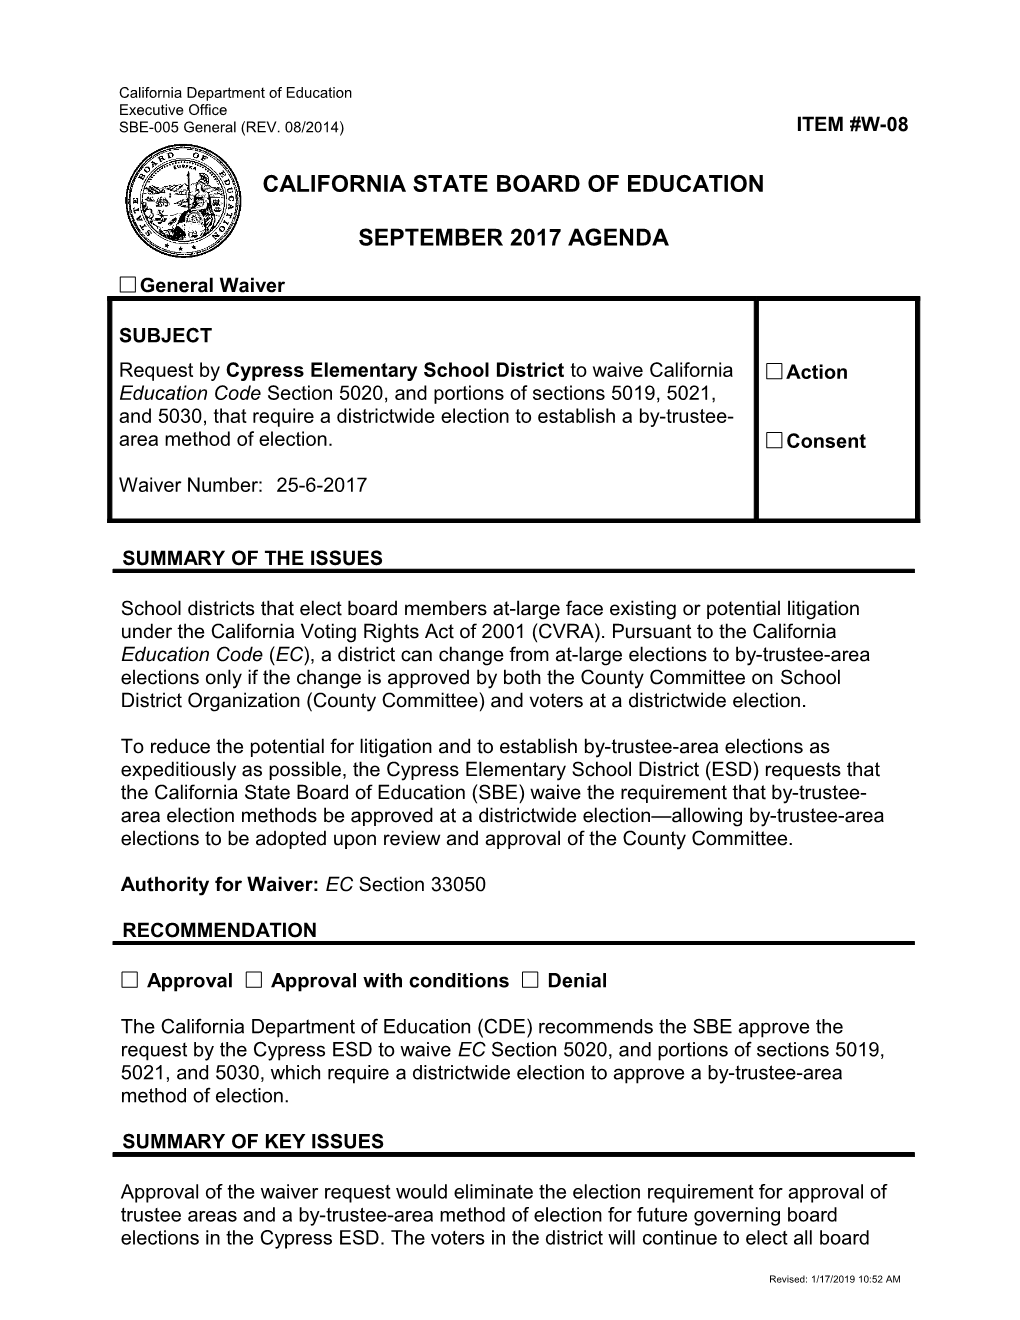 September 2017 Waiver Item W-08 - Meeting Agendas (CA State Board of Education)